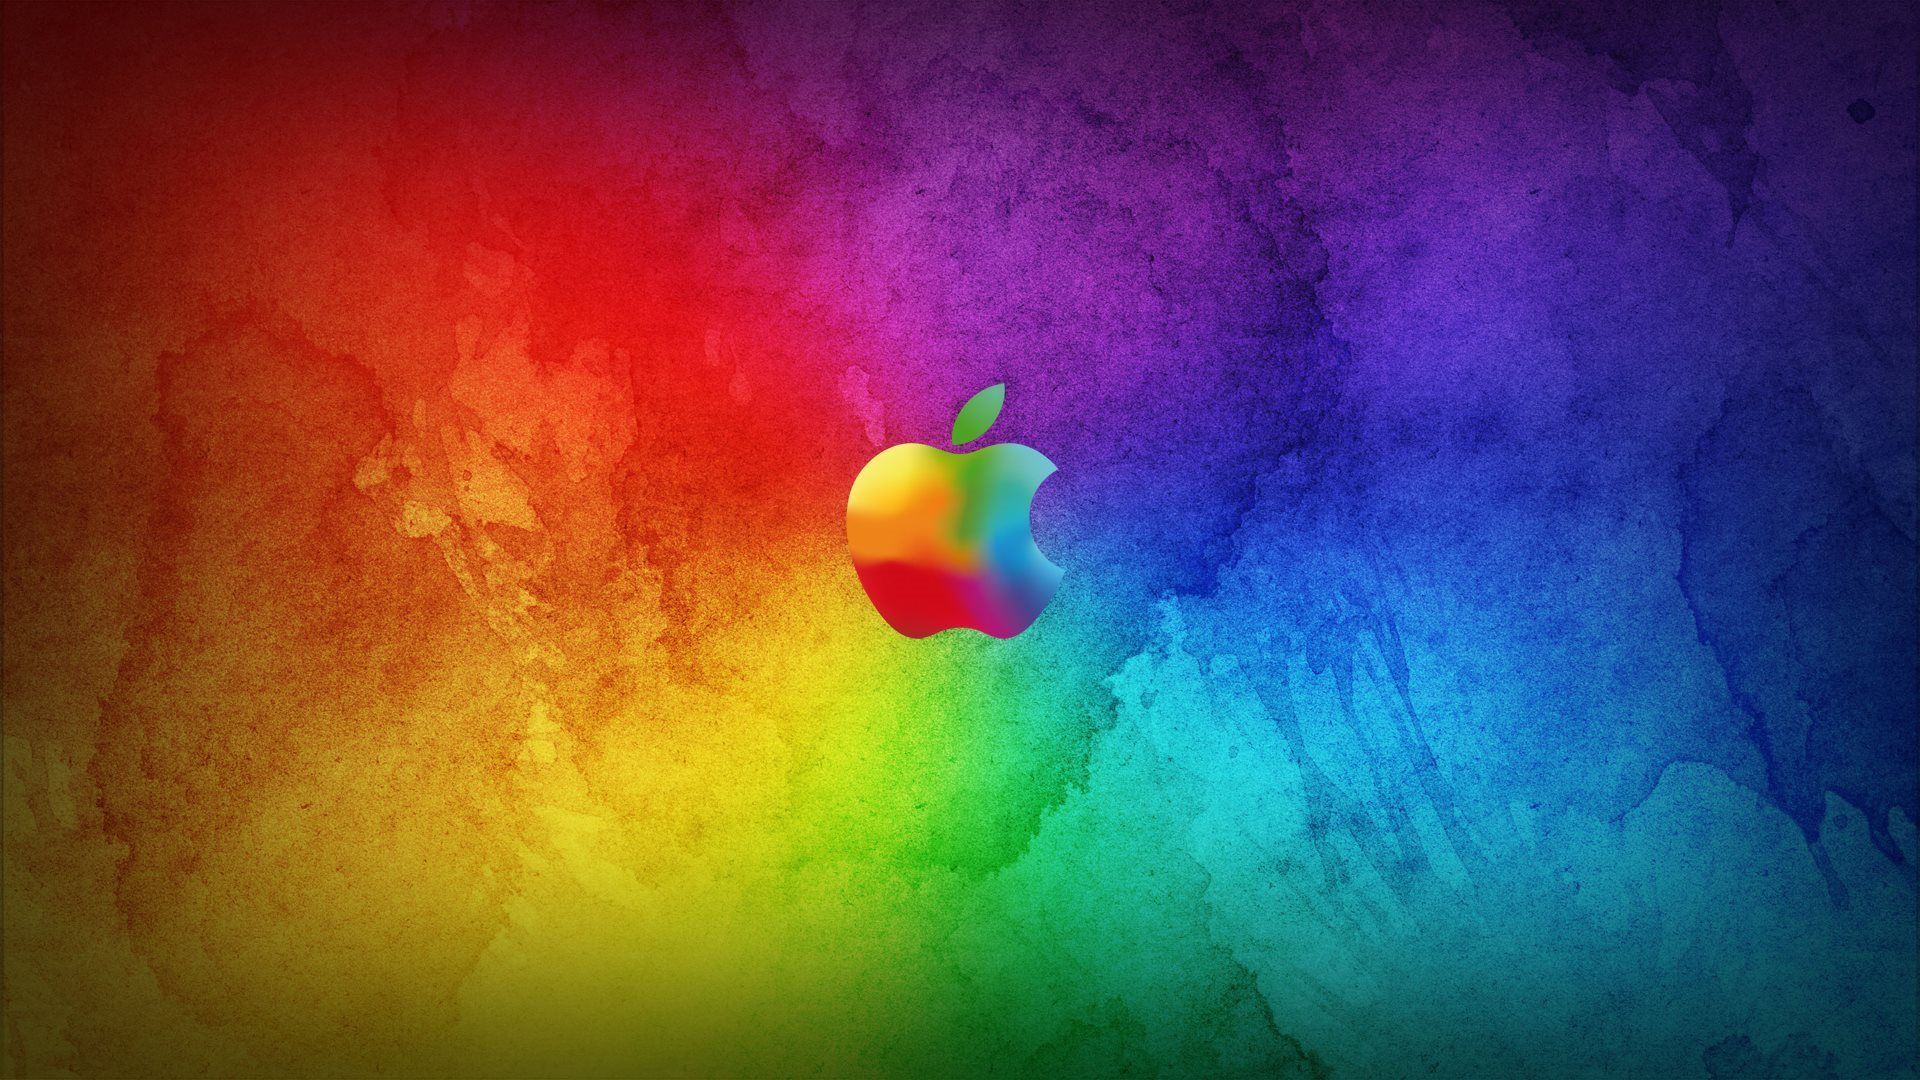 Download Amazing Colorful Apple Logo Wallpaper | Full HD Wallpapers